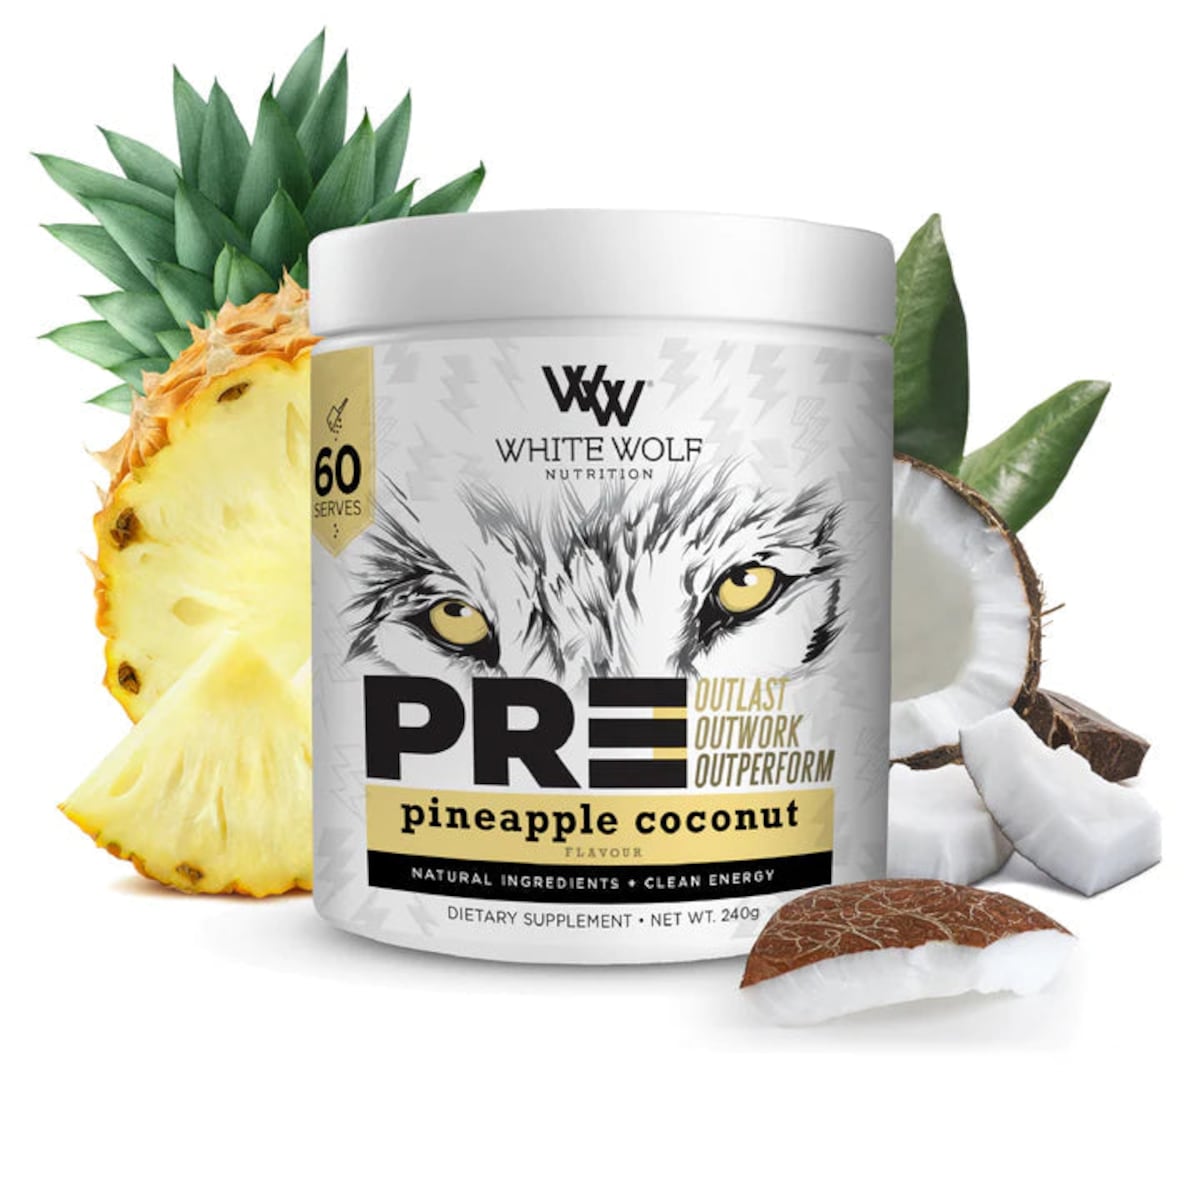 White Wolf Nutrition Preworkout Pineapple Coconut 250G